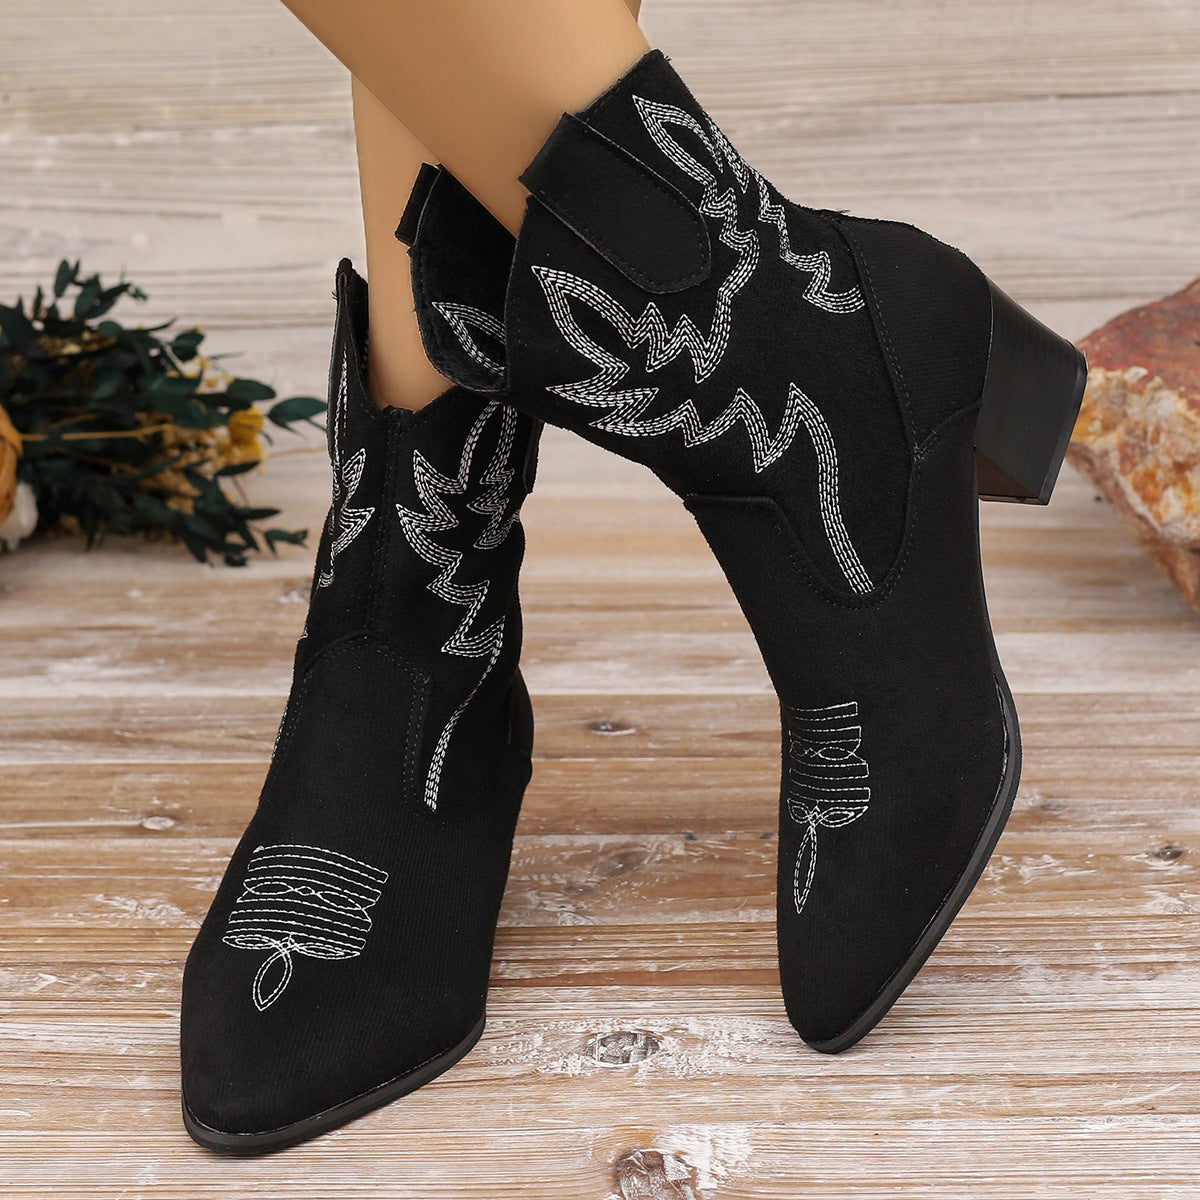 Embroidered mid-calf pointed toe knight boots